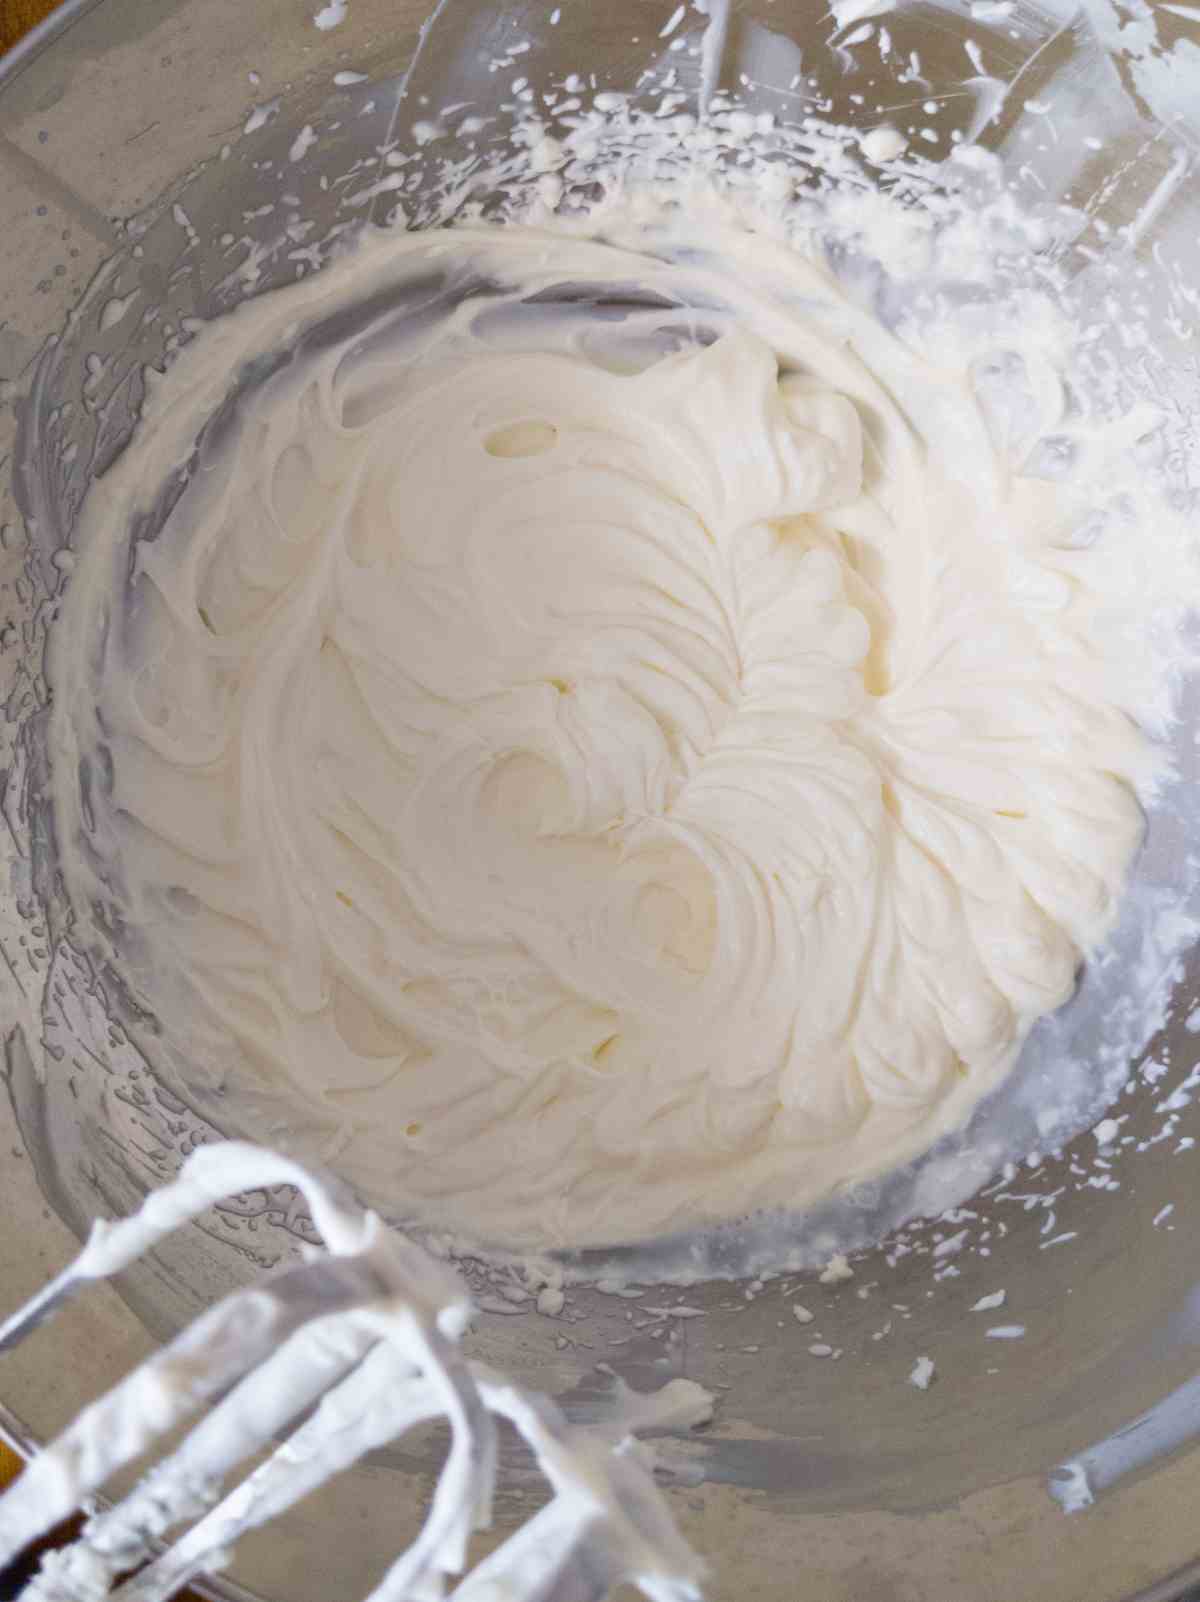 Cream cheese frosting whipped in a metal mixing bowl.